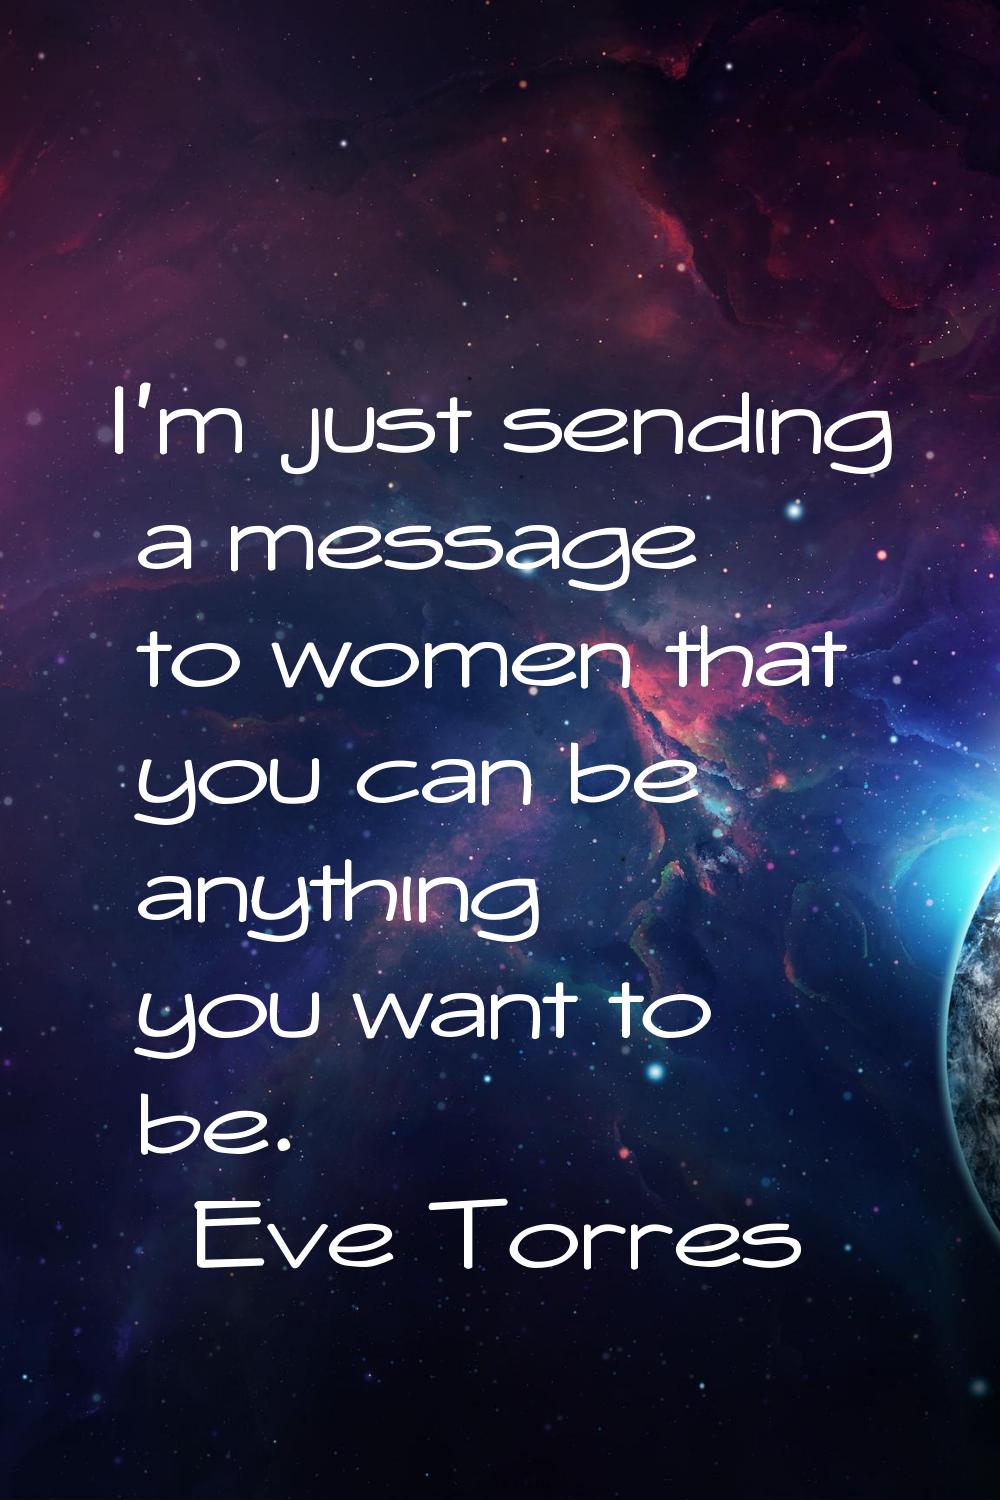 I'm just sending a message to women that you can be anything you want to be.